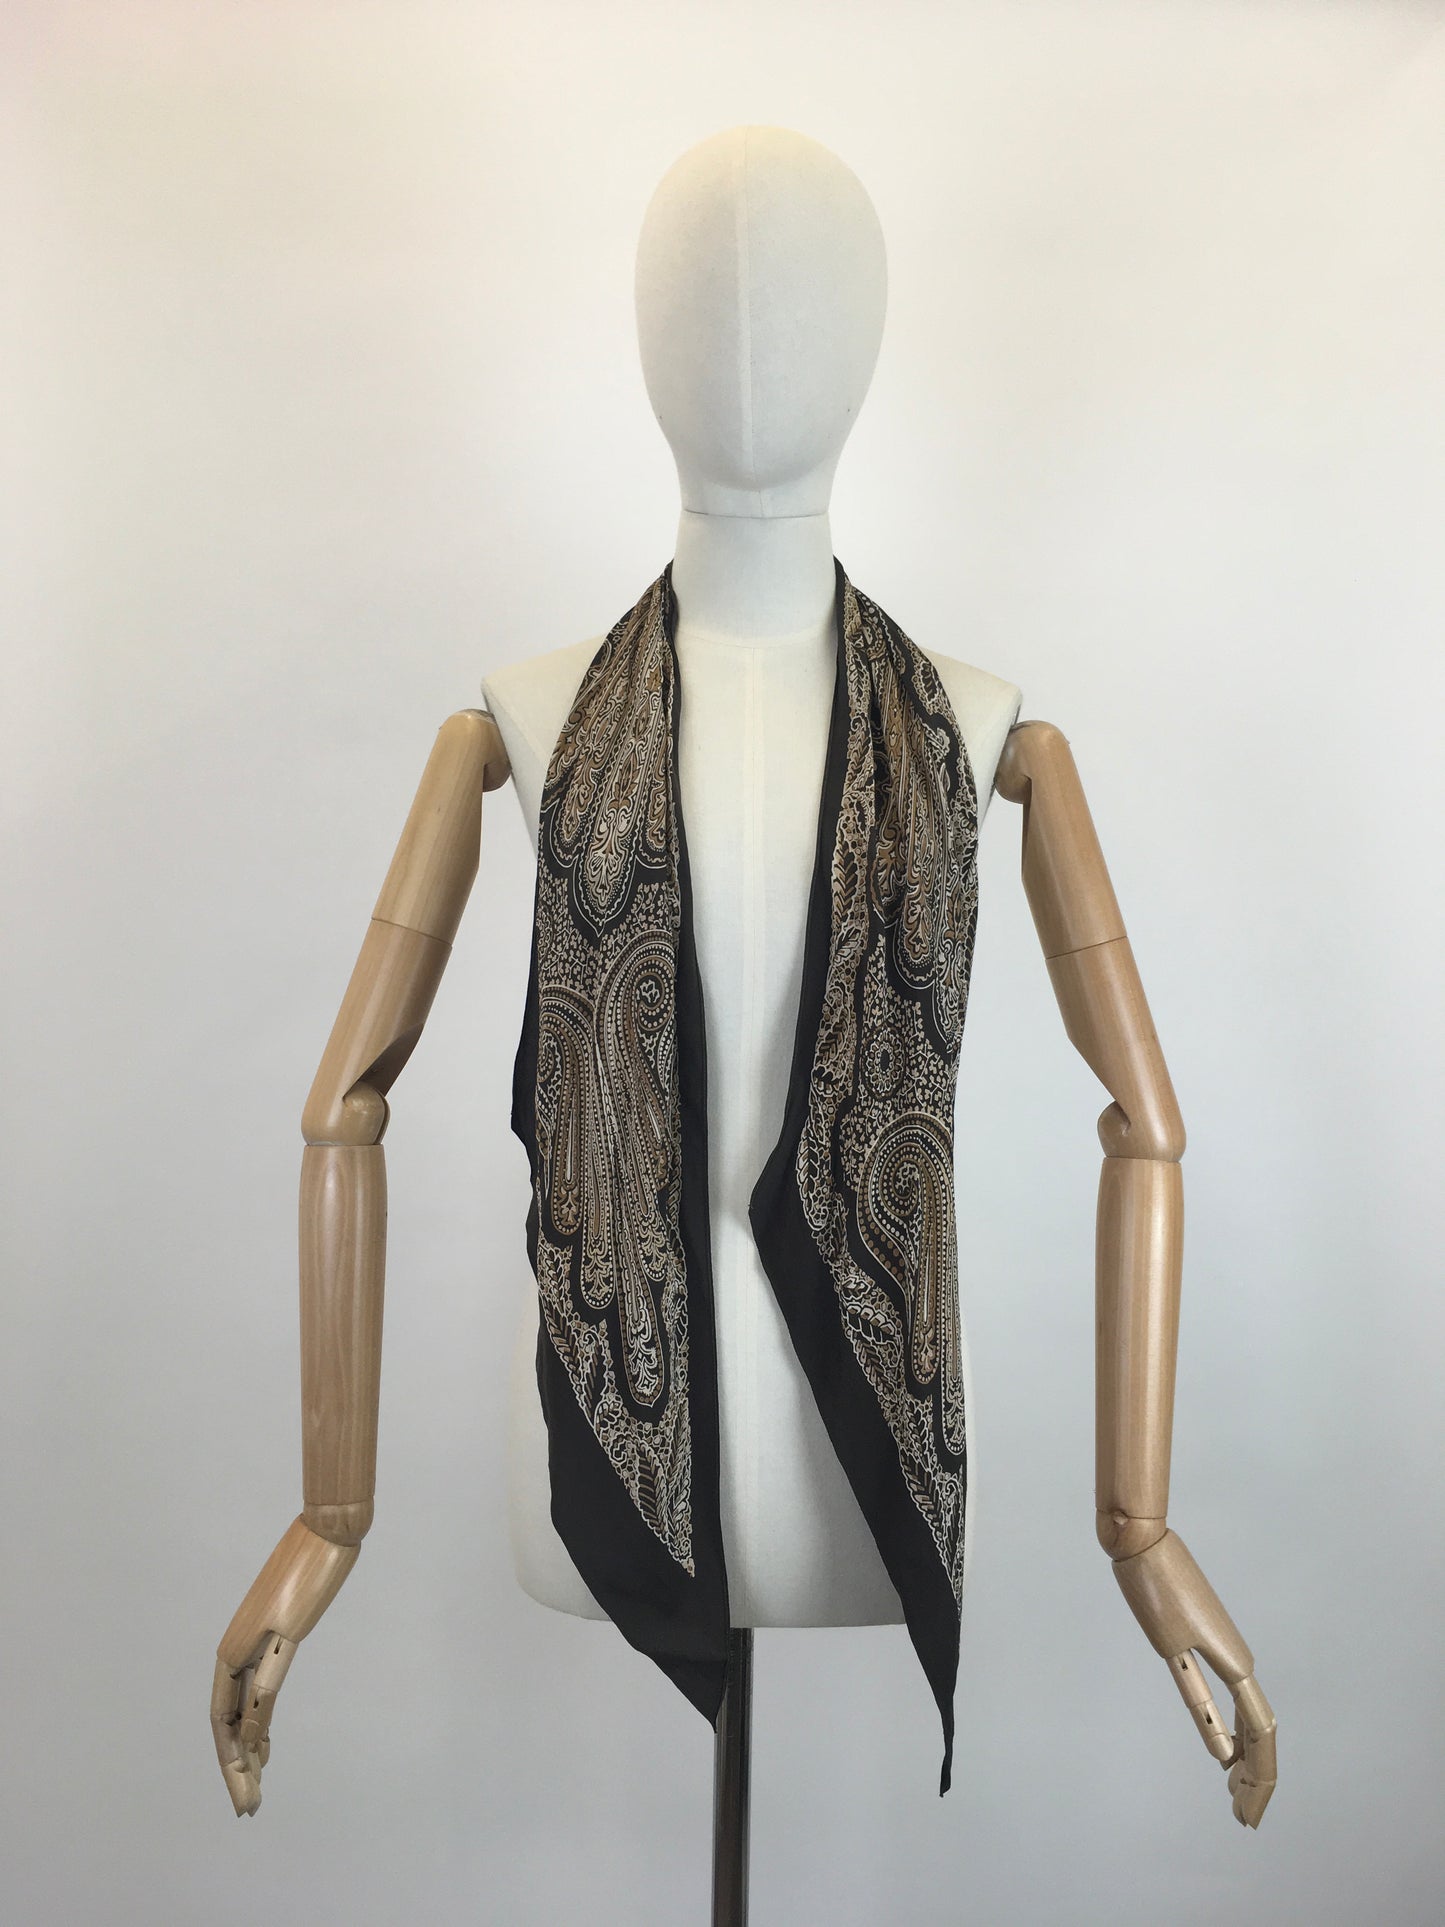 Original 1930’s Stunning Deco Pointed Scarf - In Warm Browns, Taupes and Mushrooms